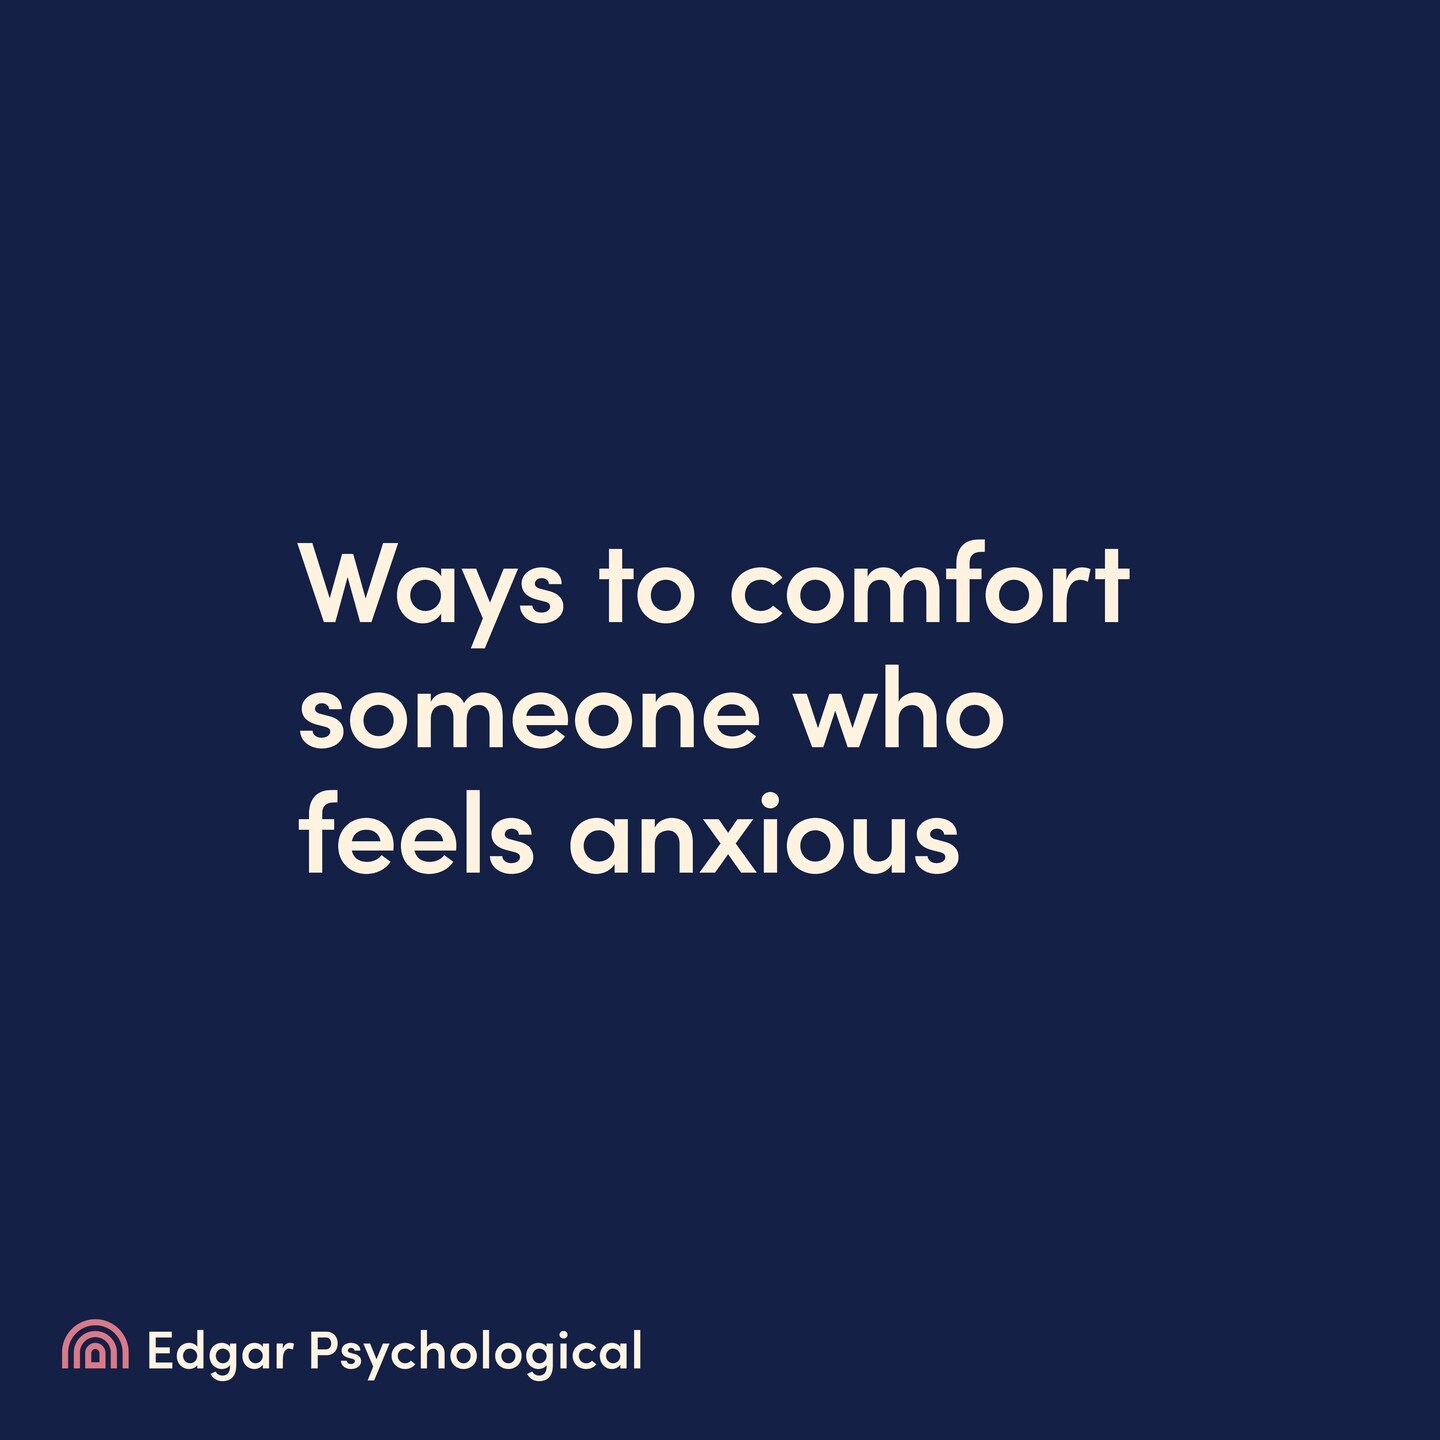 Showing empathy, understanding, and patience can be extremely valuable to someone who experiences anxiety.

It&rsquo;s common to feel anxious at times. Anxiety is an adaptive behaviour and can be our mind and body&rsquo;s way of responding to a stres